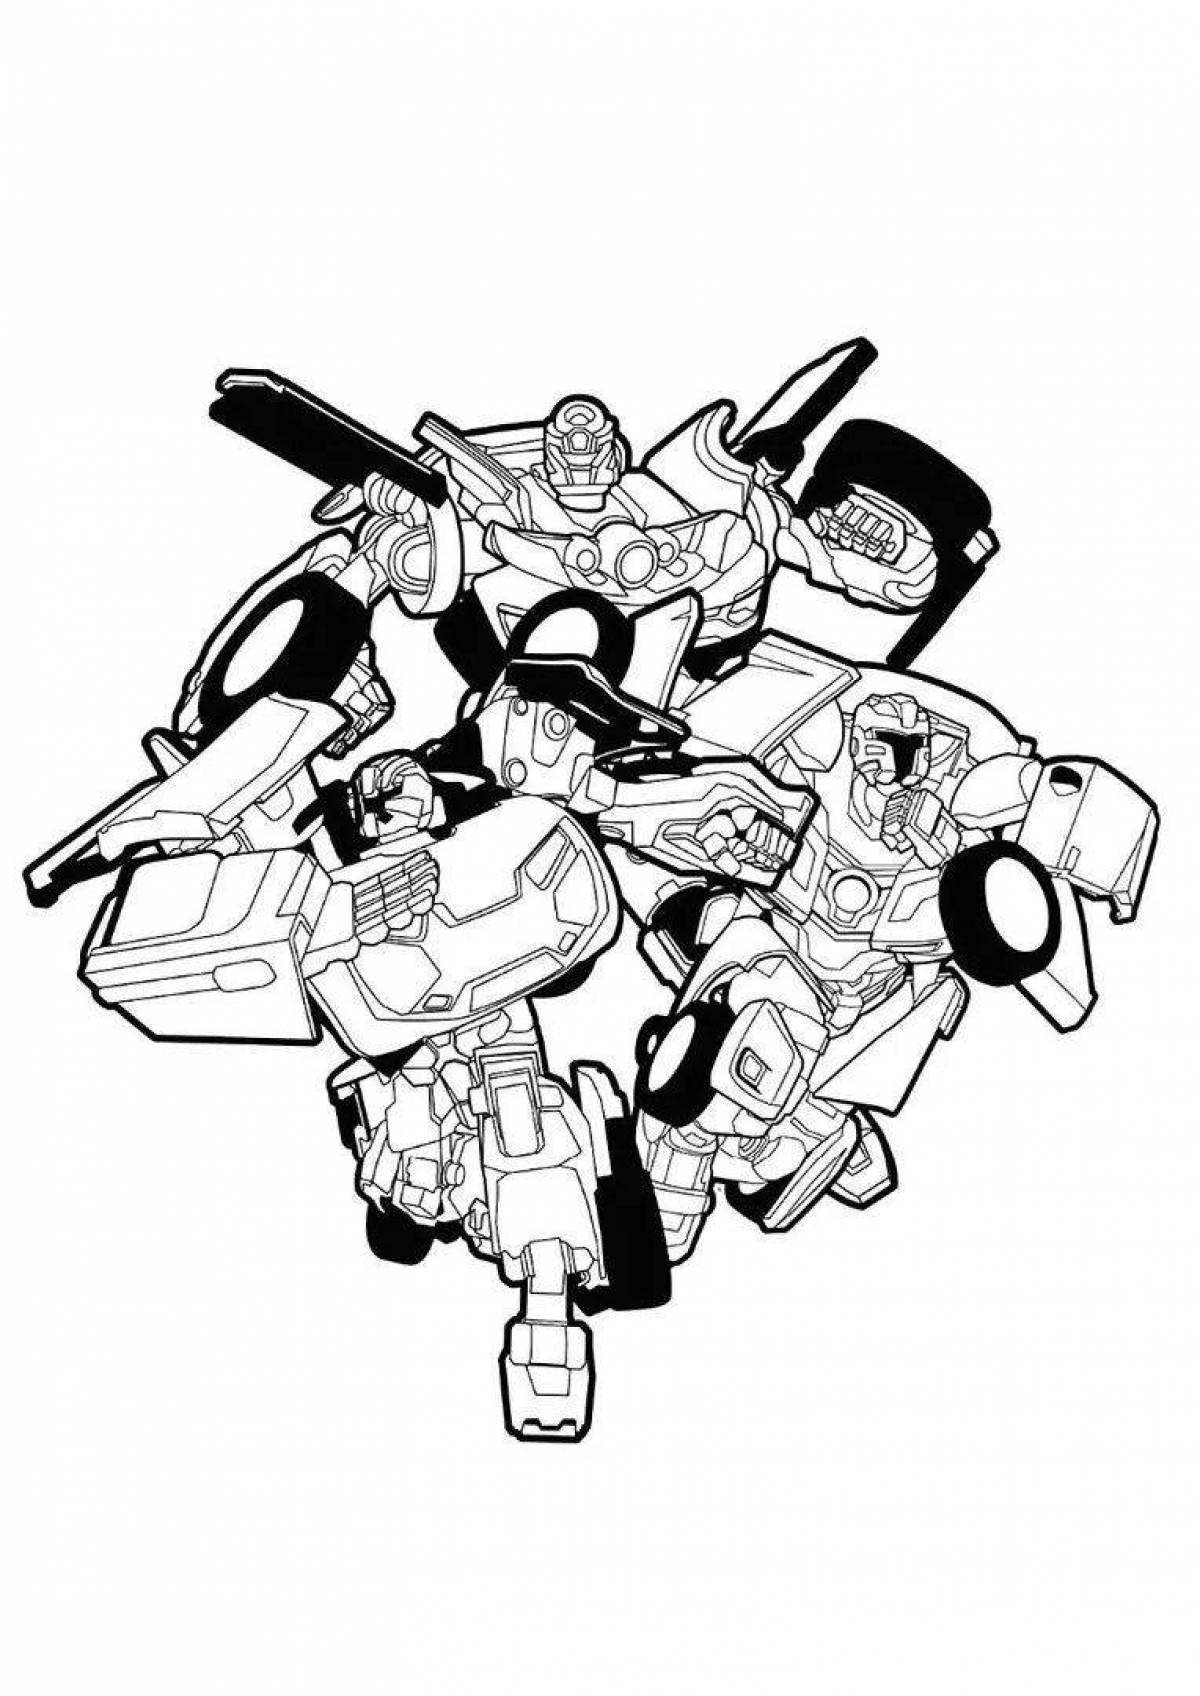 Tobot y colorful coloring page